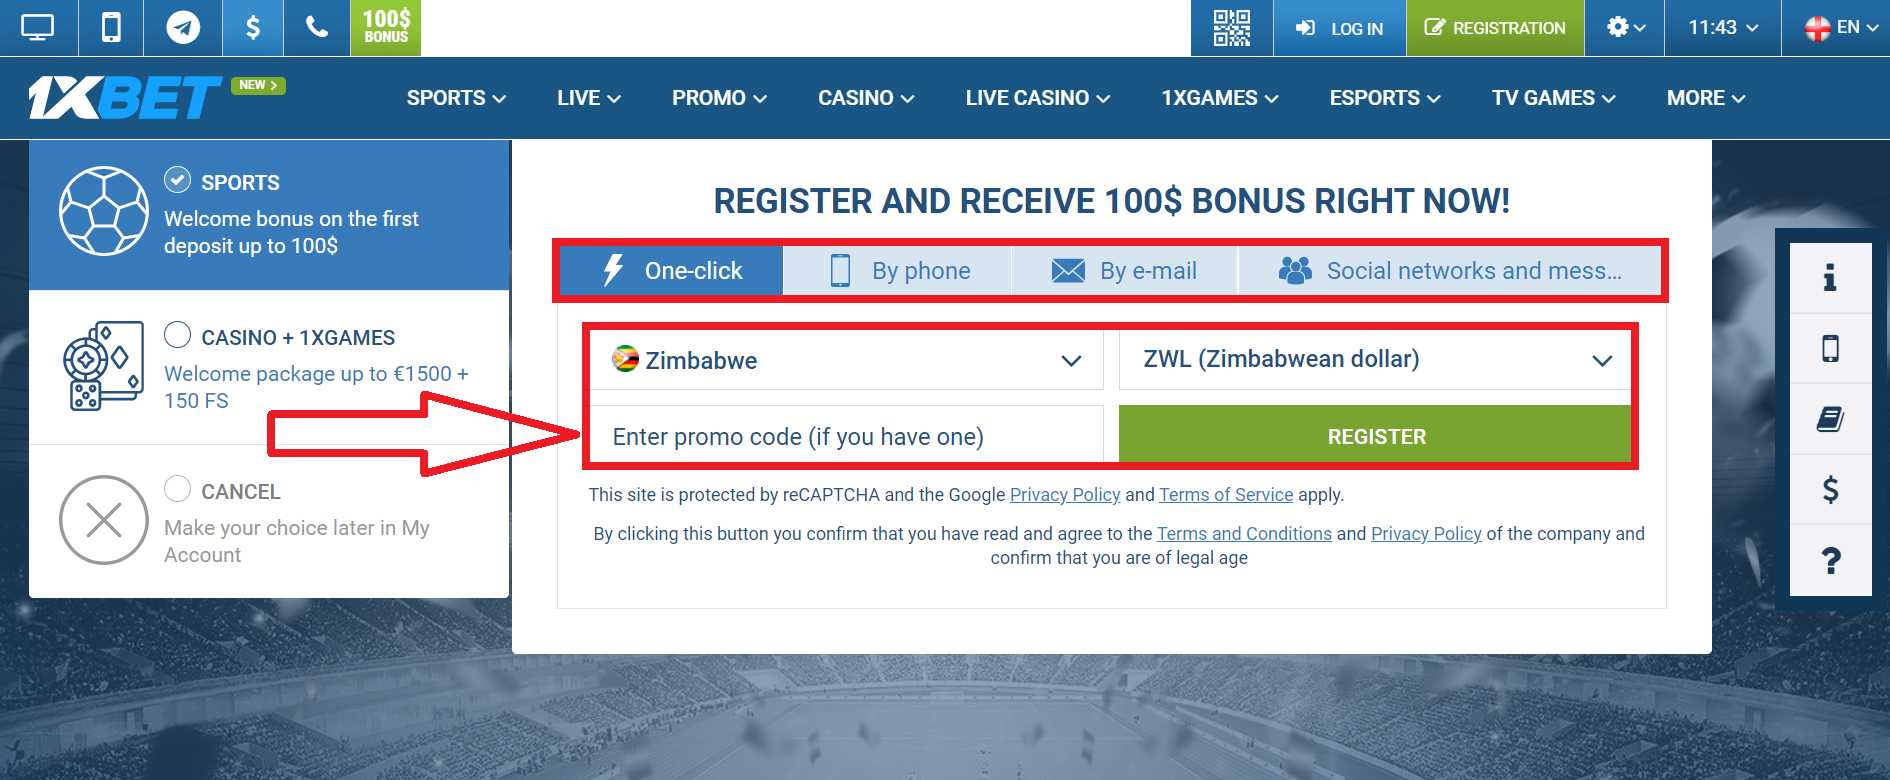 Registration and login at the 1xBet betting platform